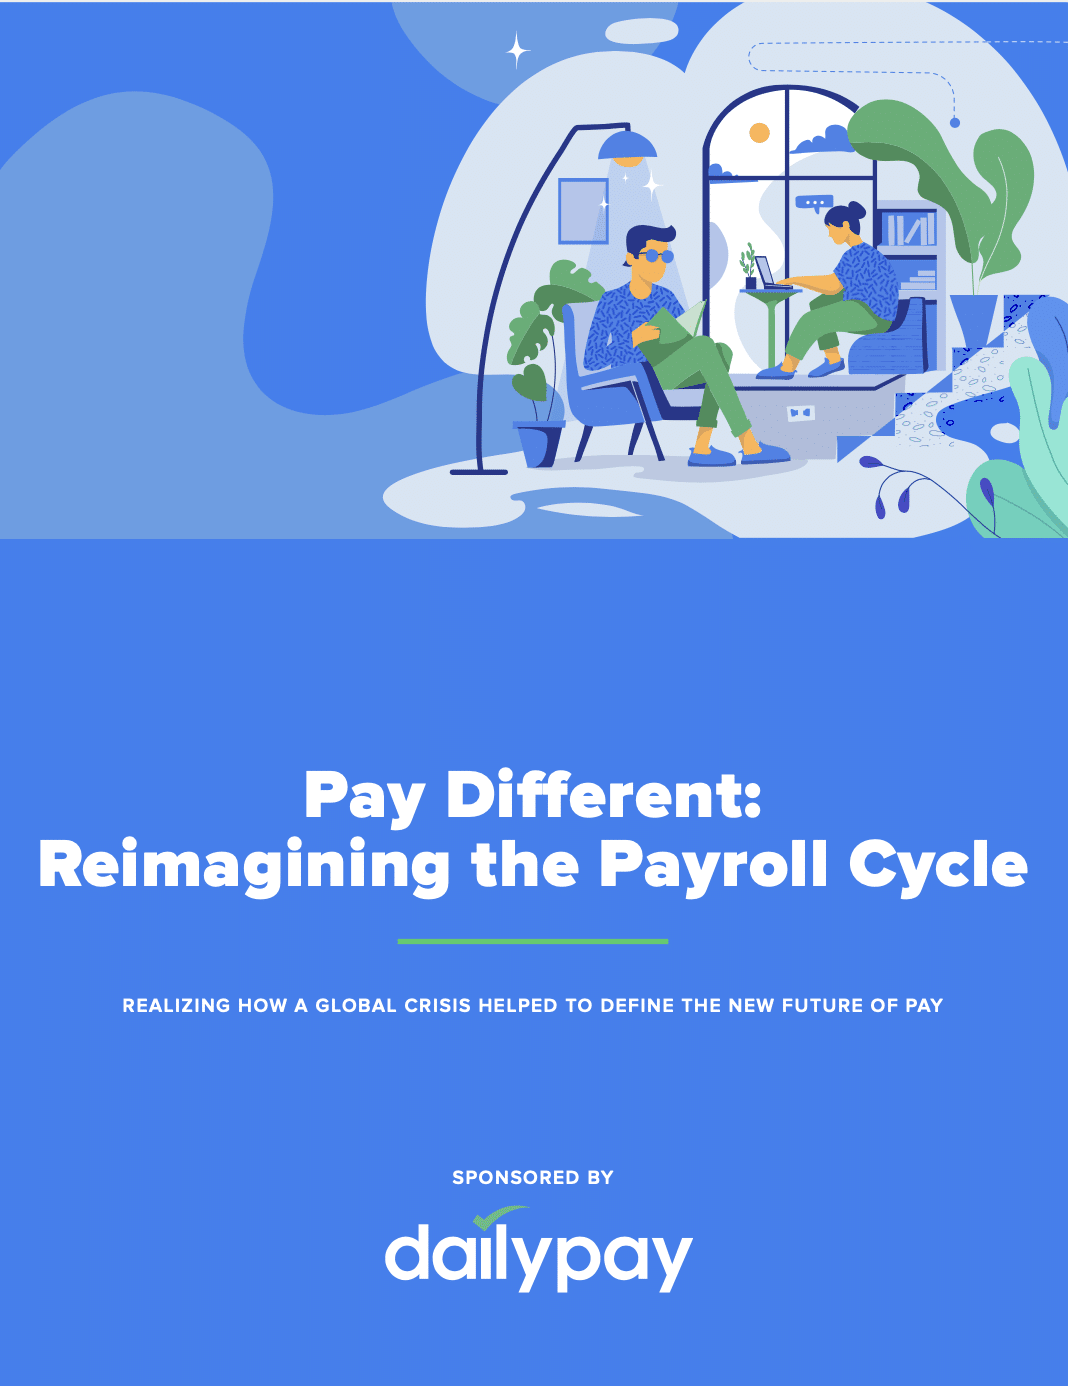 Vector illustration of two people, one sitting at a desk with a laptop and the other on a chair, in a cozy indoor setting with plants, discussing the "Payroll on Demand" concept, sponsored by DailyPay.